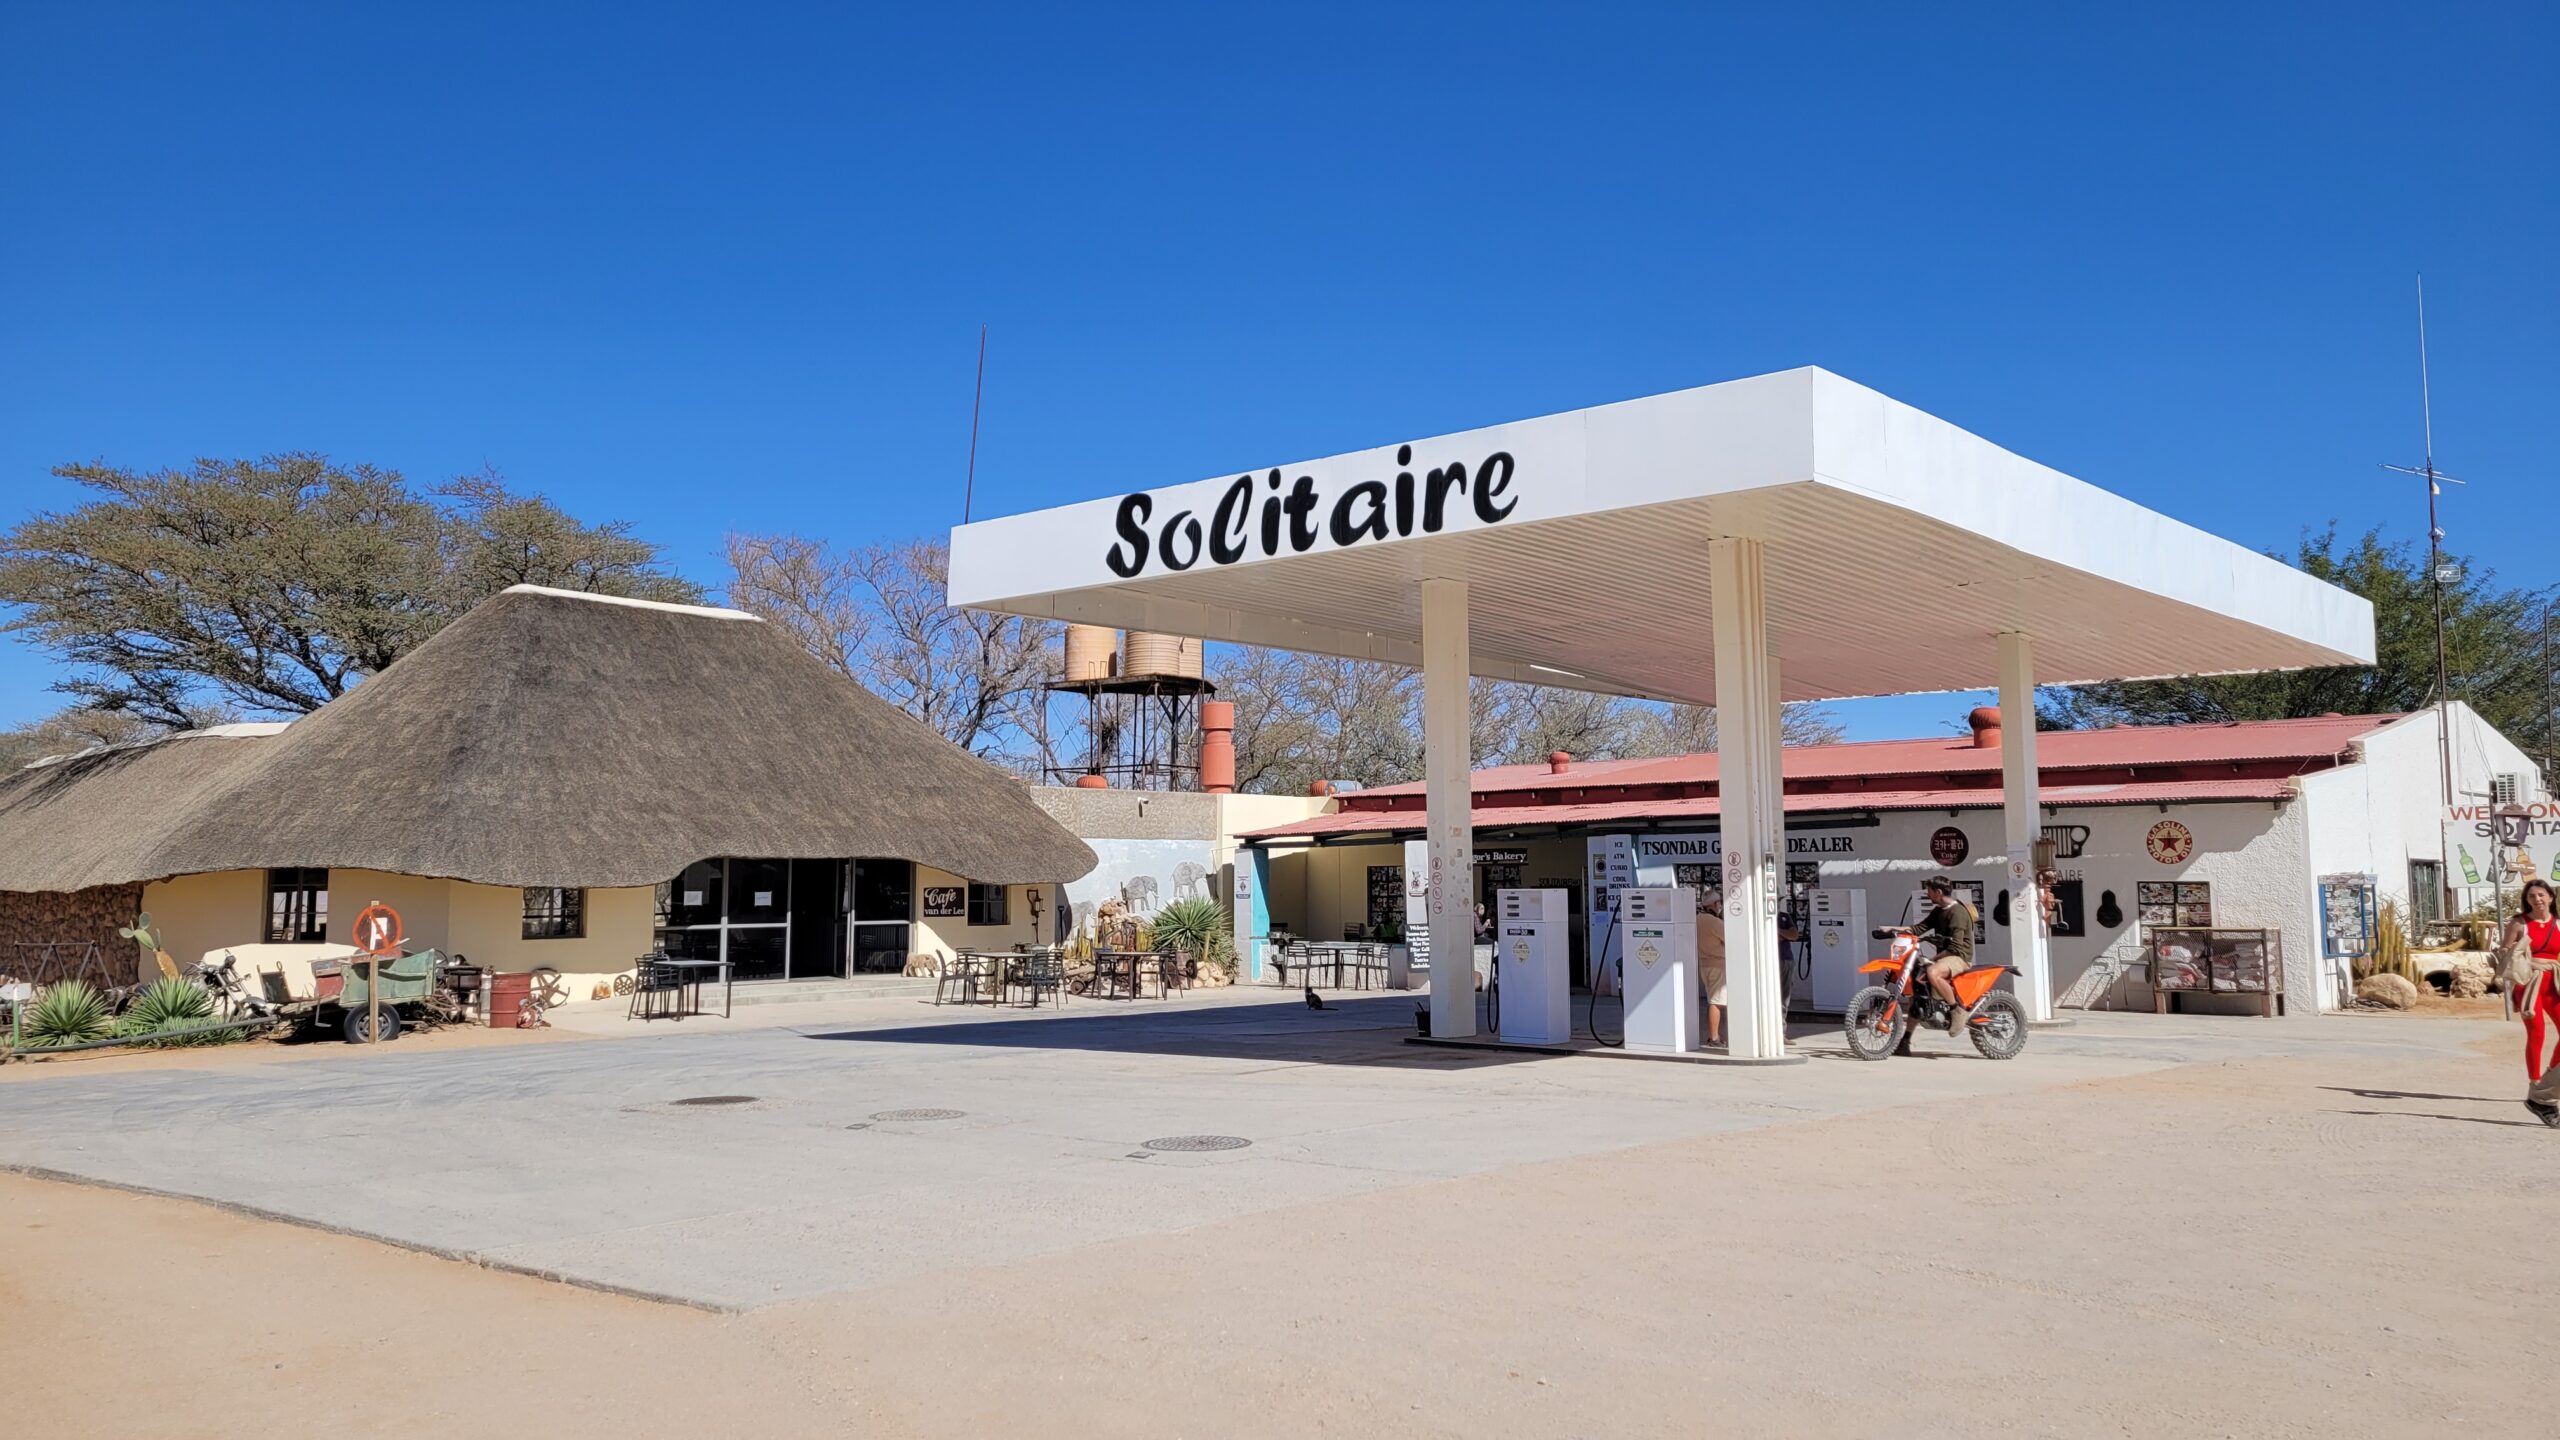 Namibie Solitaire station essence